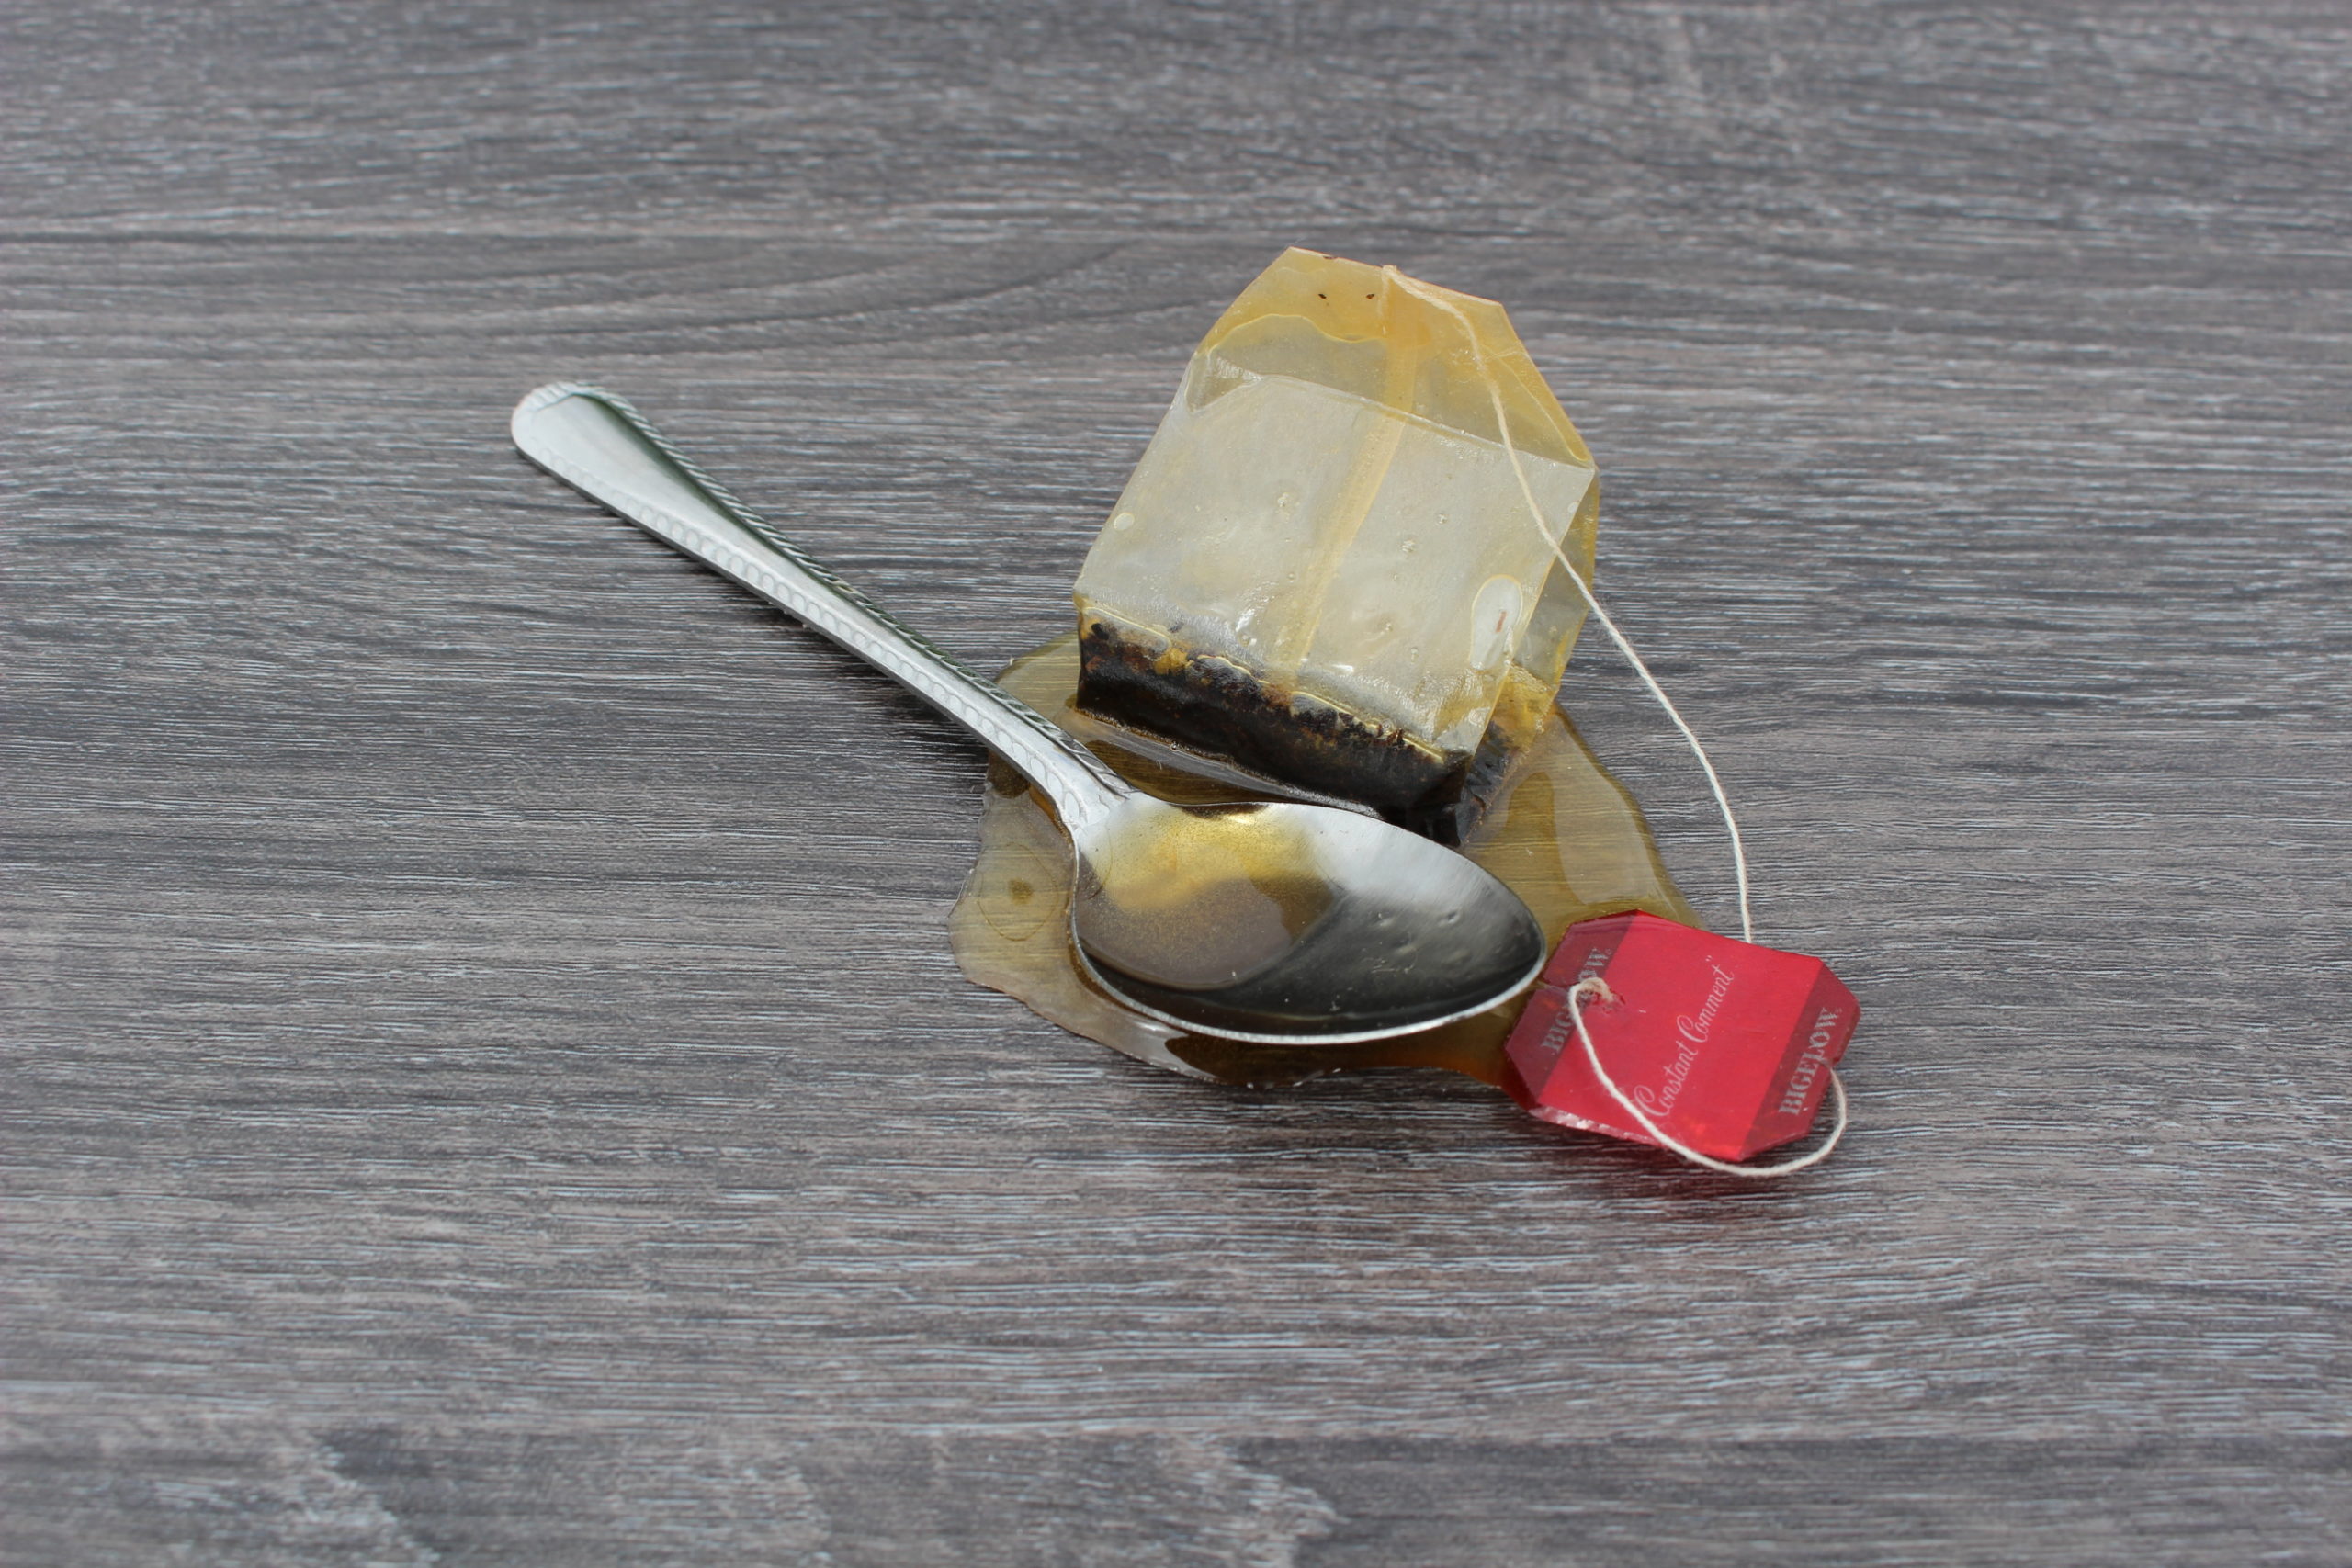 https://justdoughit.com/wp-content/uploads/TEA-BAG-AND-SPOON-IN-PUDDLE-511S-scaled.jpg